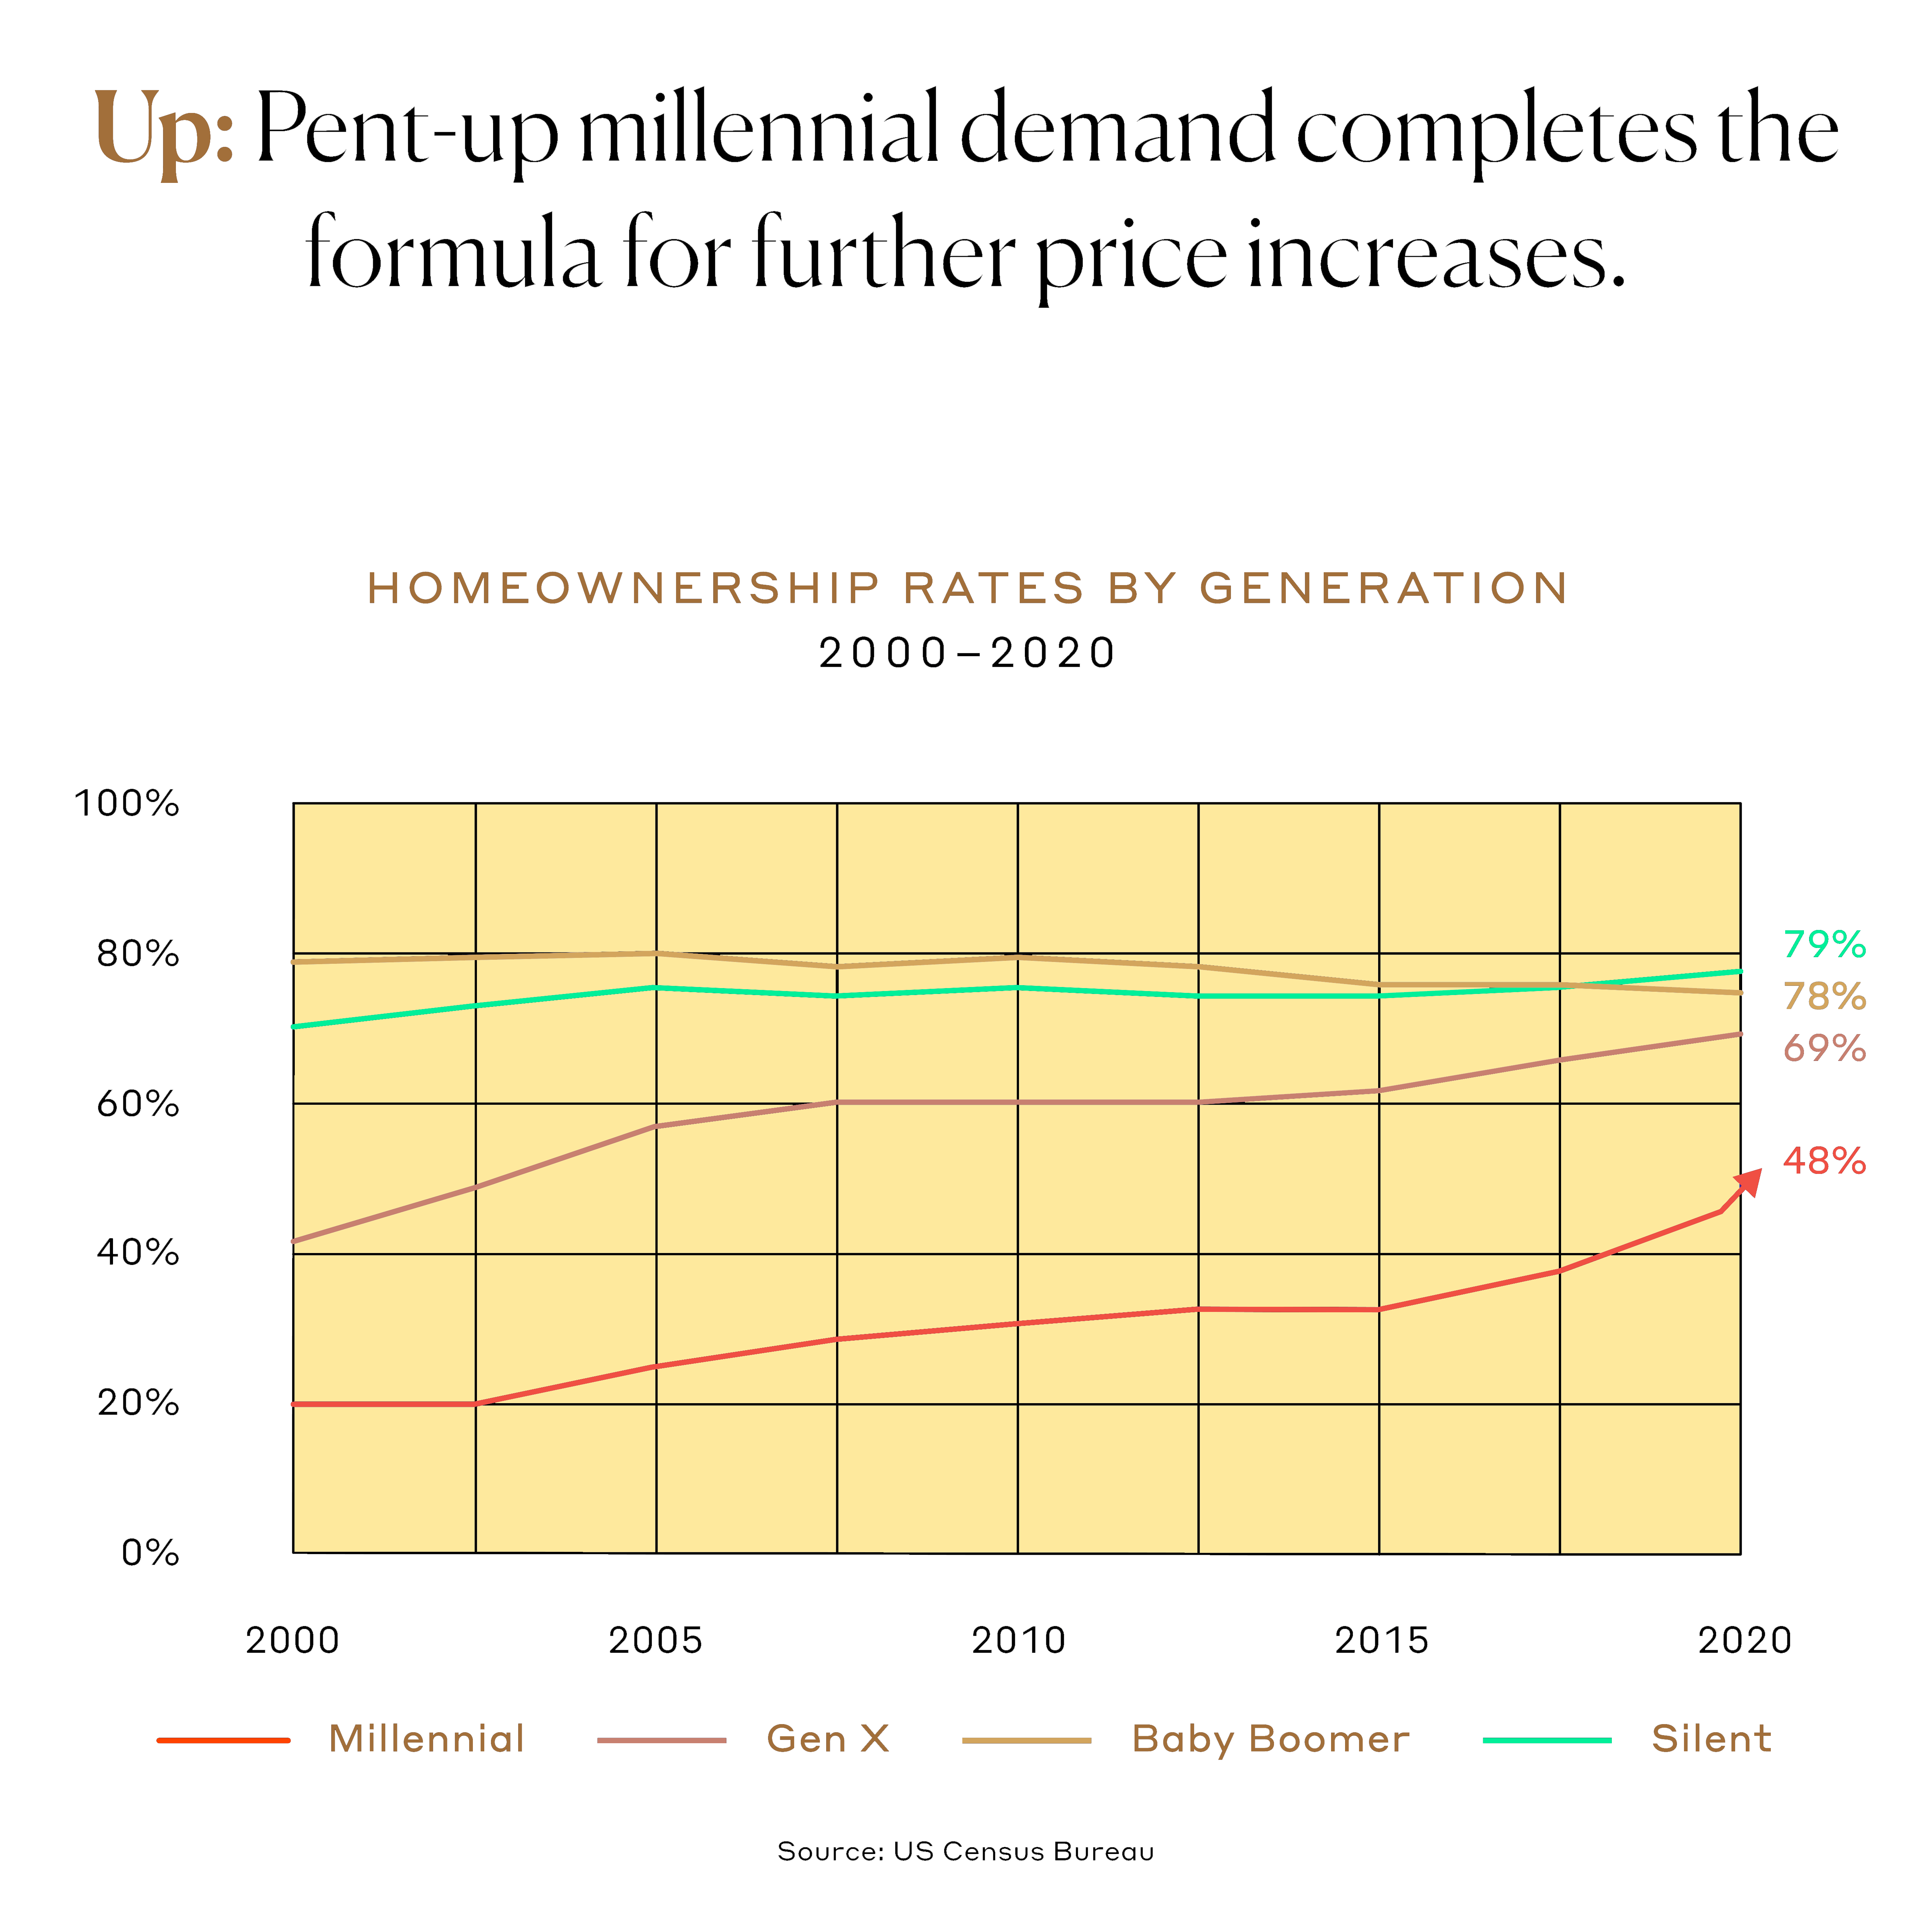 Up: Pent-up millennial demand completes the formula for further price increases.